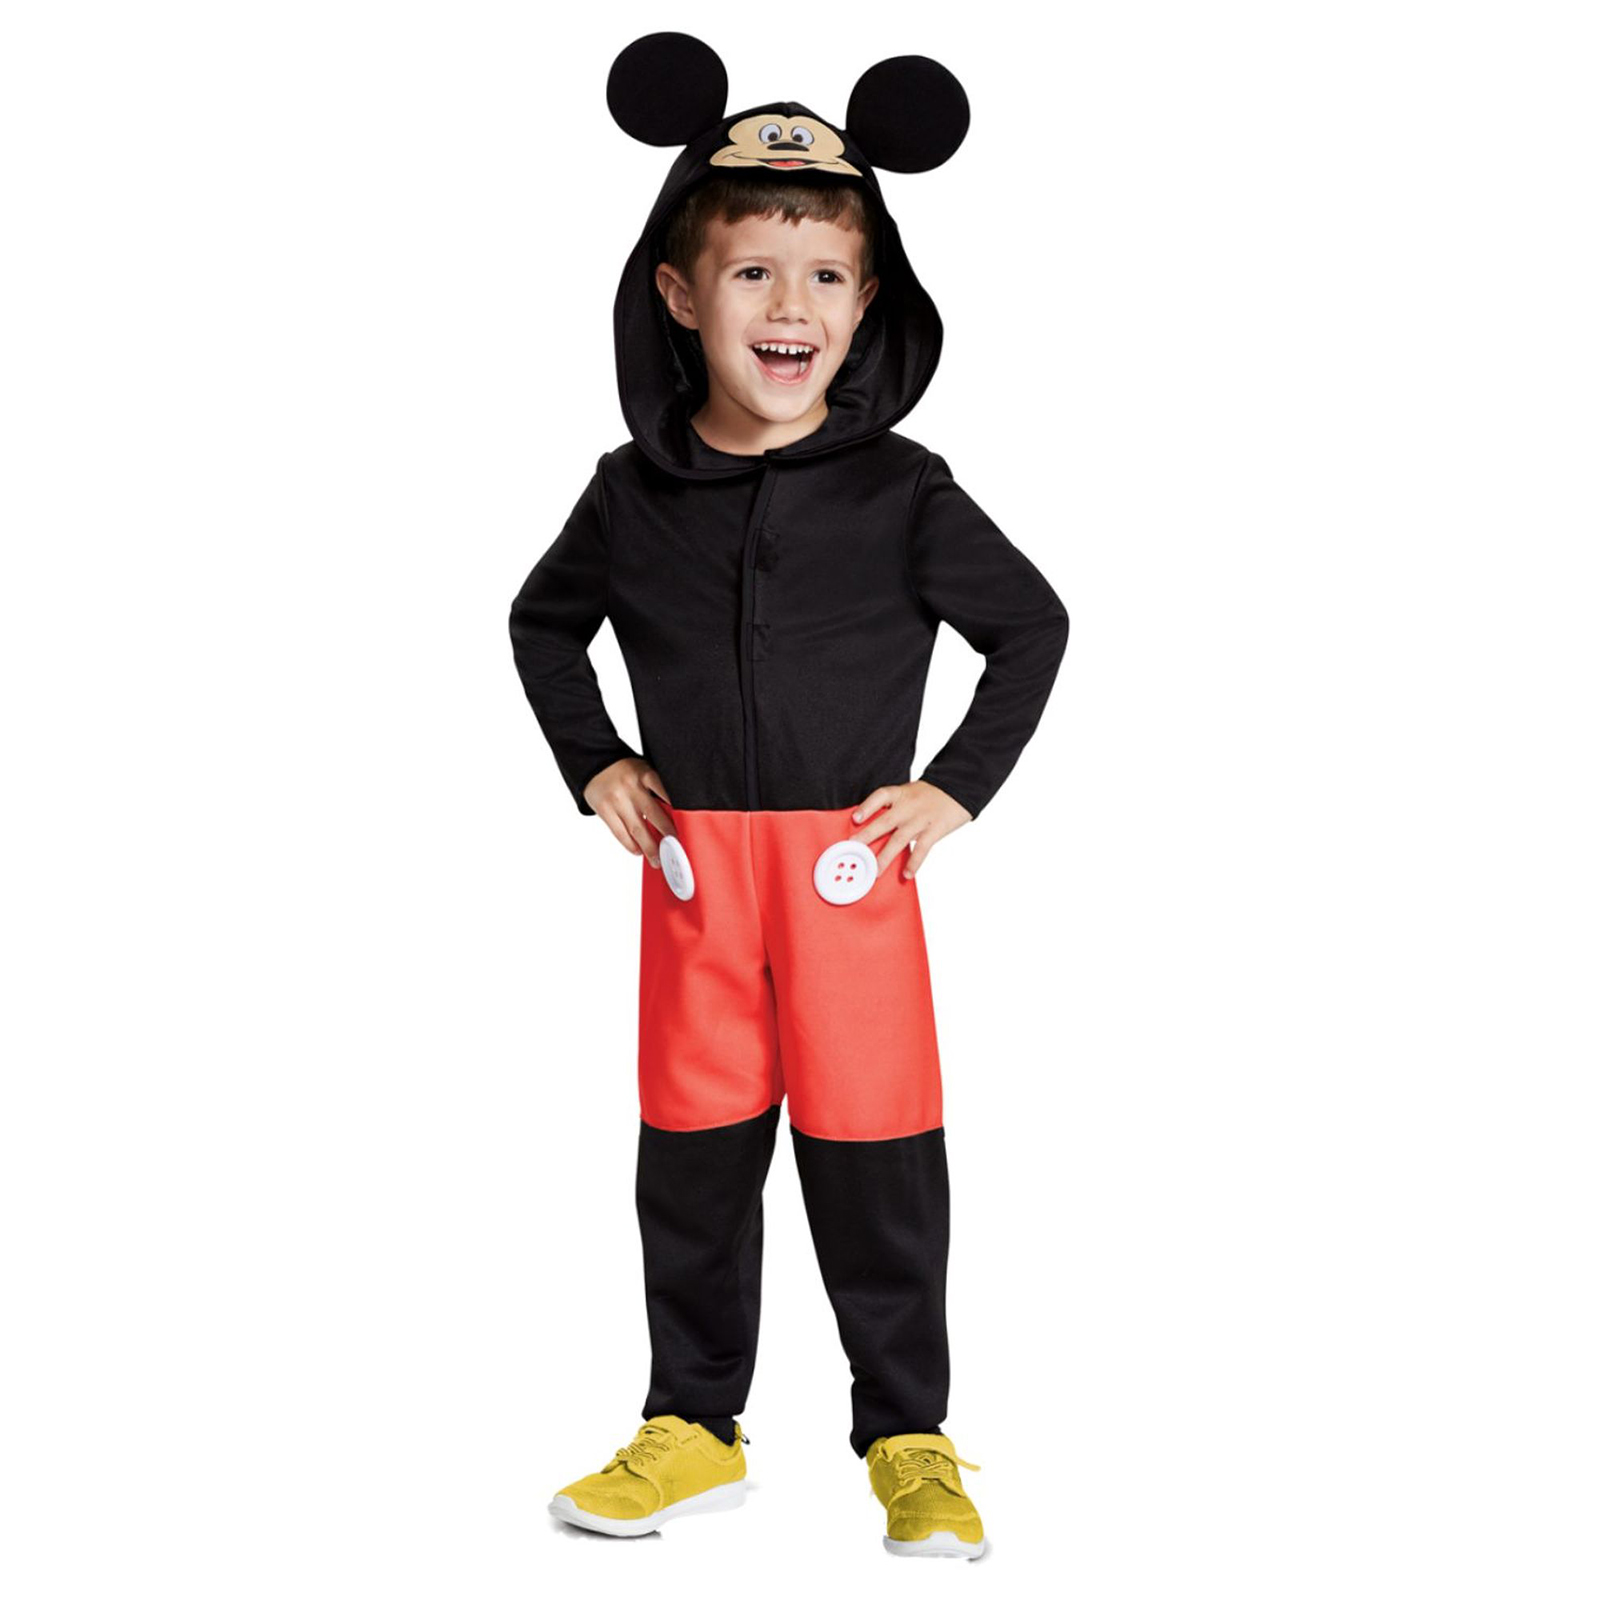 Disney Toddler Boys' Mickey Mouse Costume - Red and Black